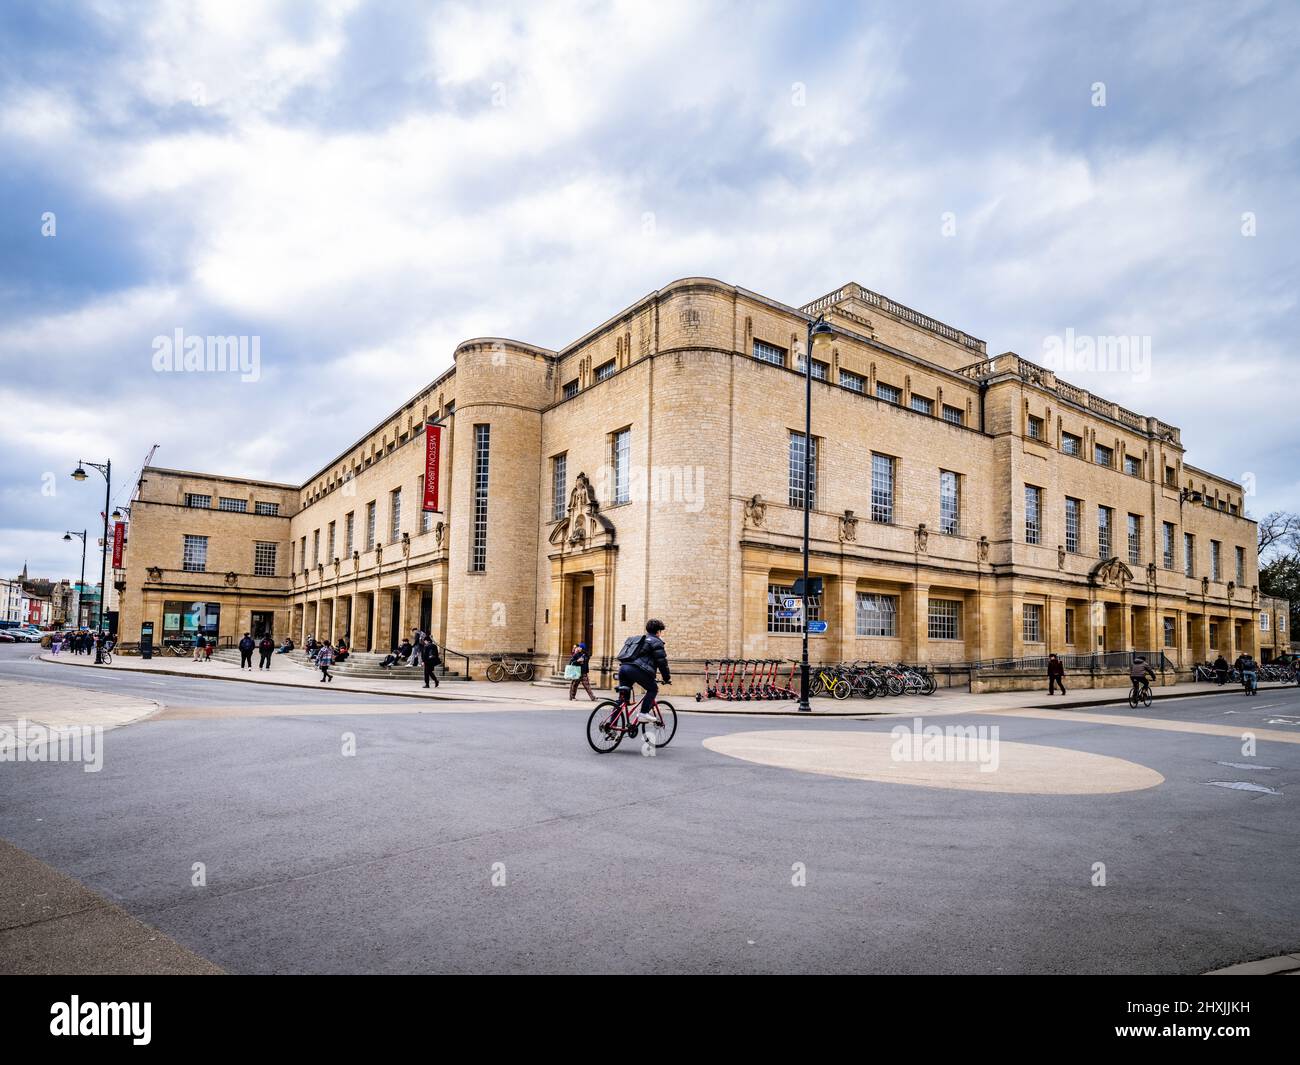 The Weston Library on the corner of Broad Street and Parks Street in the centre of Oxford. The Weston Library is the home of the Bodleian Libraries sp Stock Photo